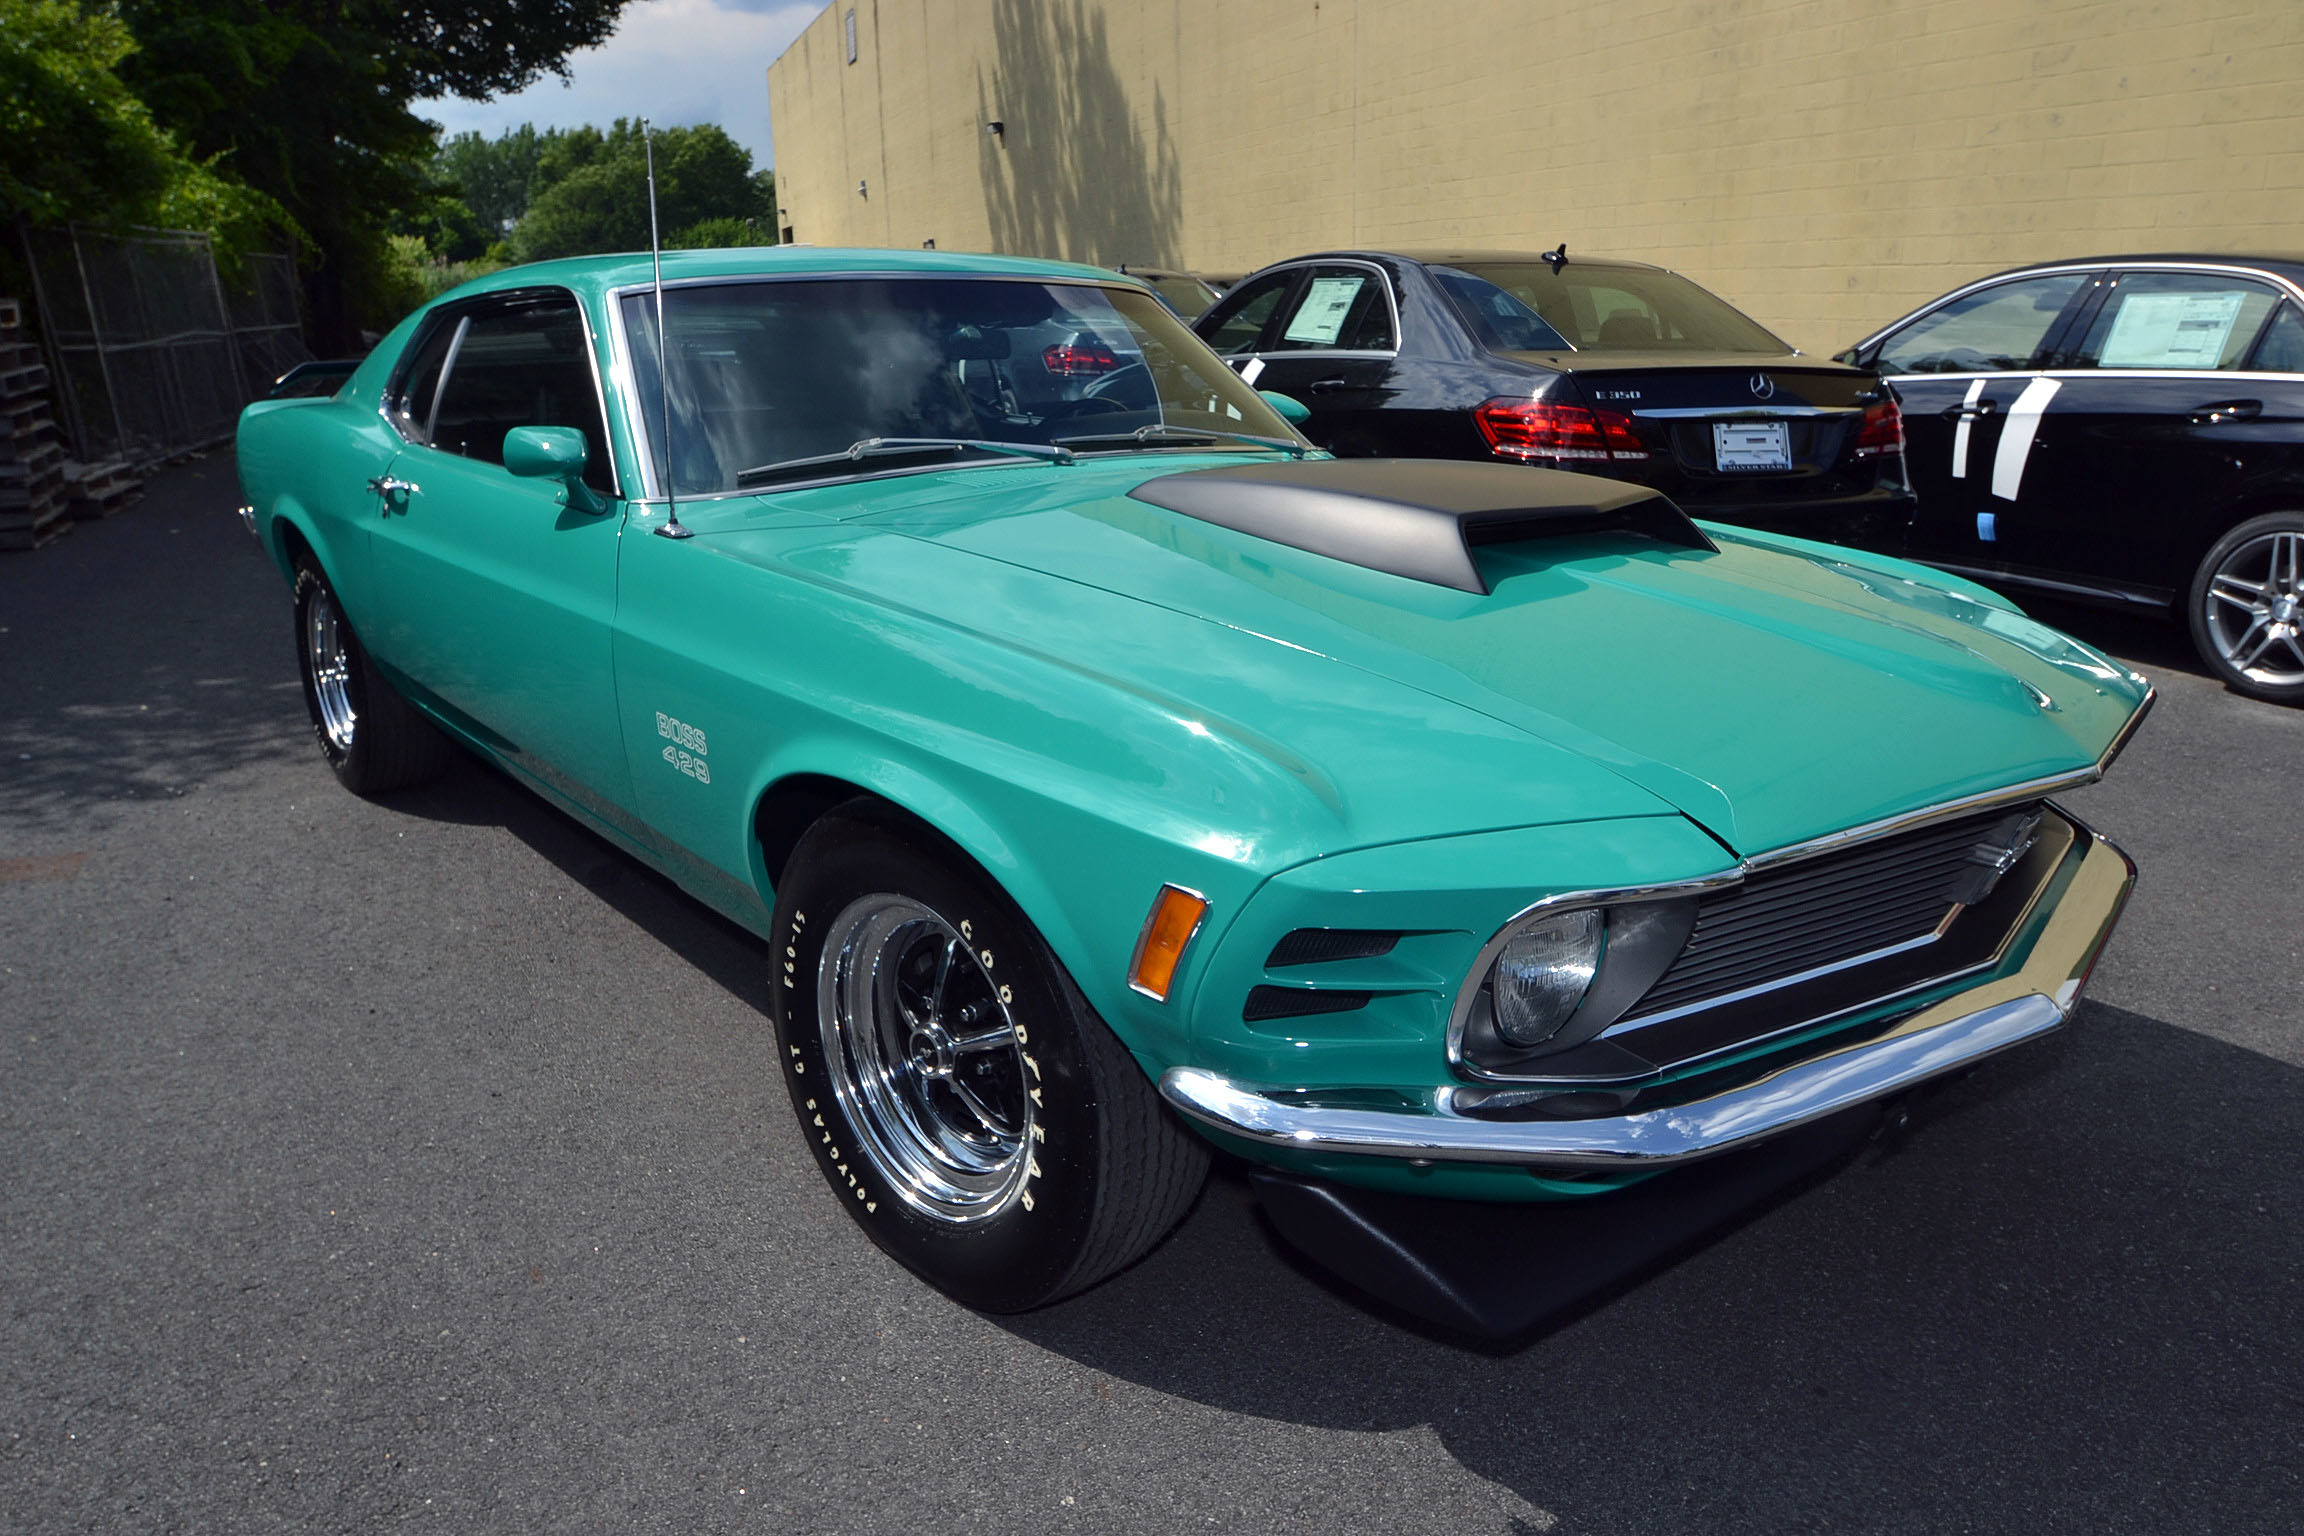 US Marshal's classic muscle car auction officially in the books - Autoblog